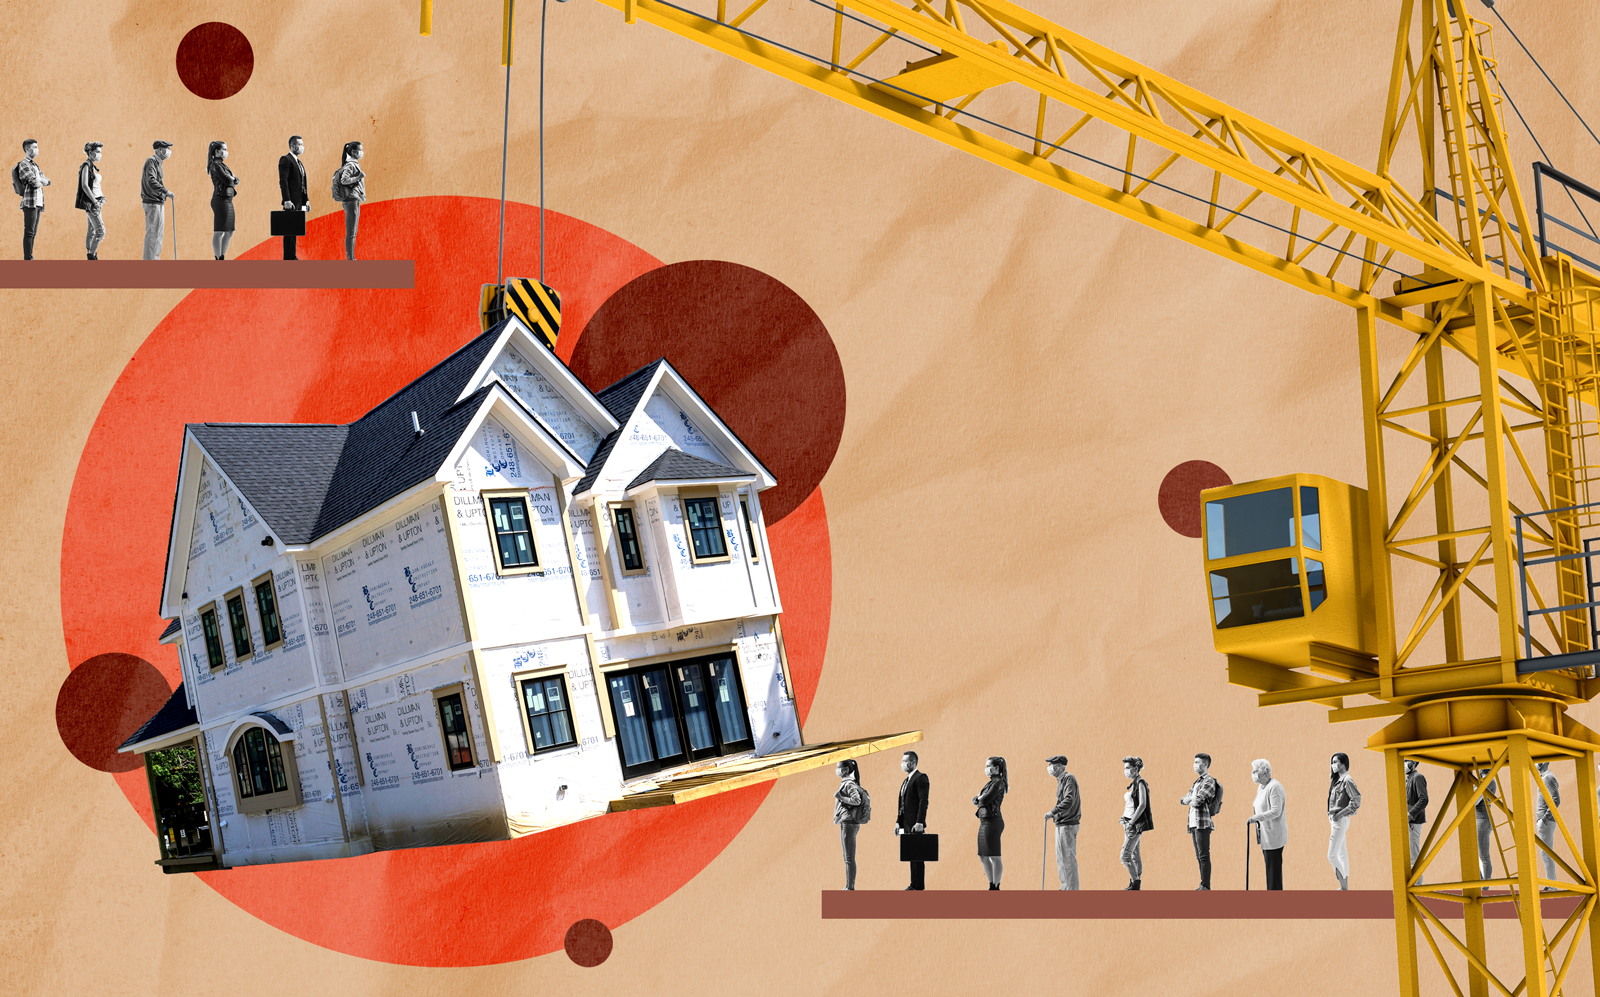 The NAHB/Wells Fargo Housing Index reading increased in February, driven by expectations that homebuyer traffic was picking up. (iStock/Illustration by Kevin Rebong for The Real Deal)